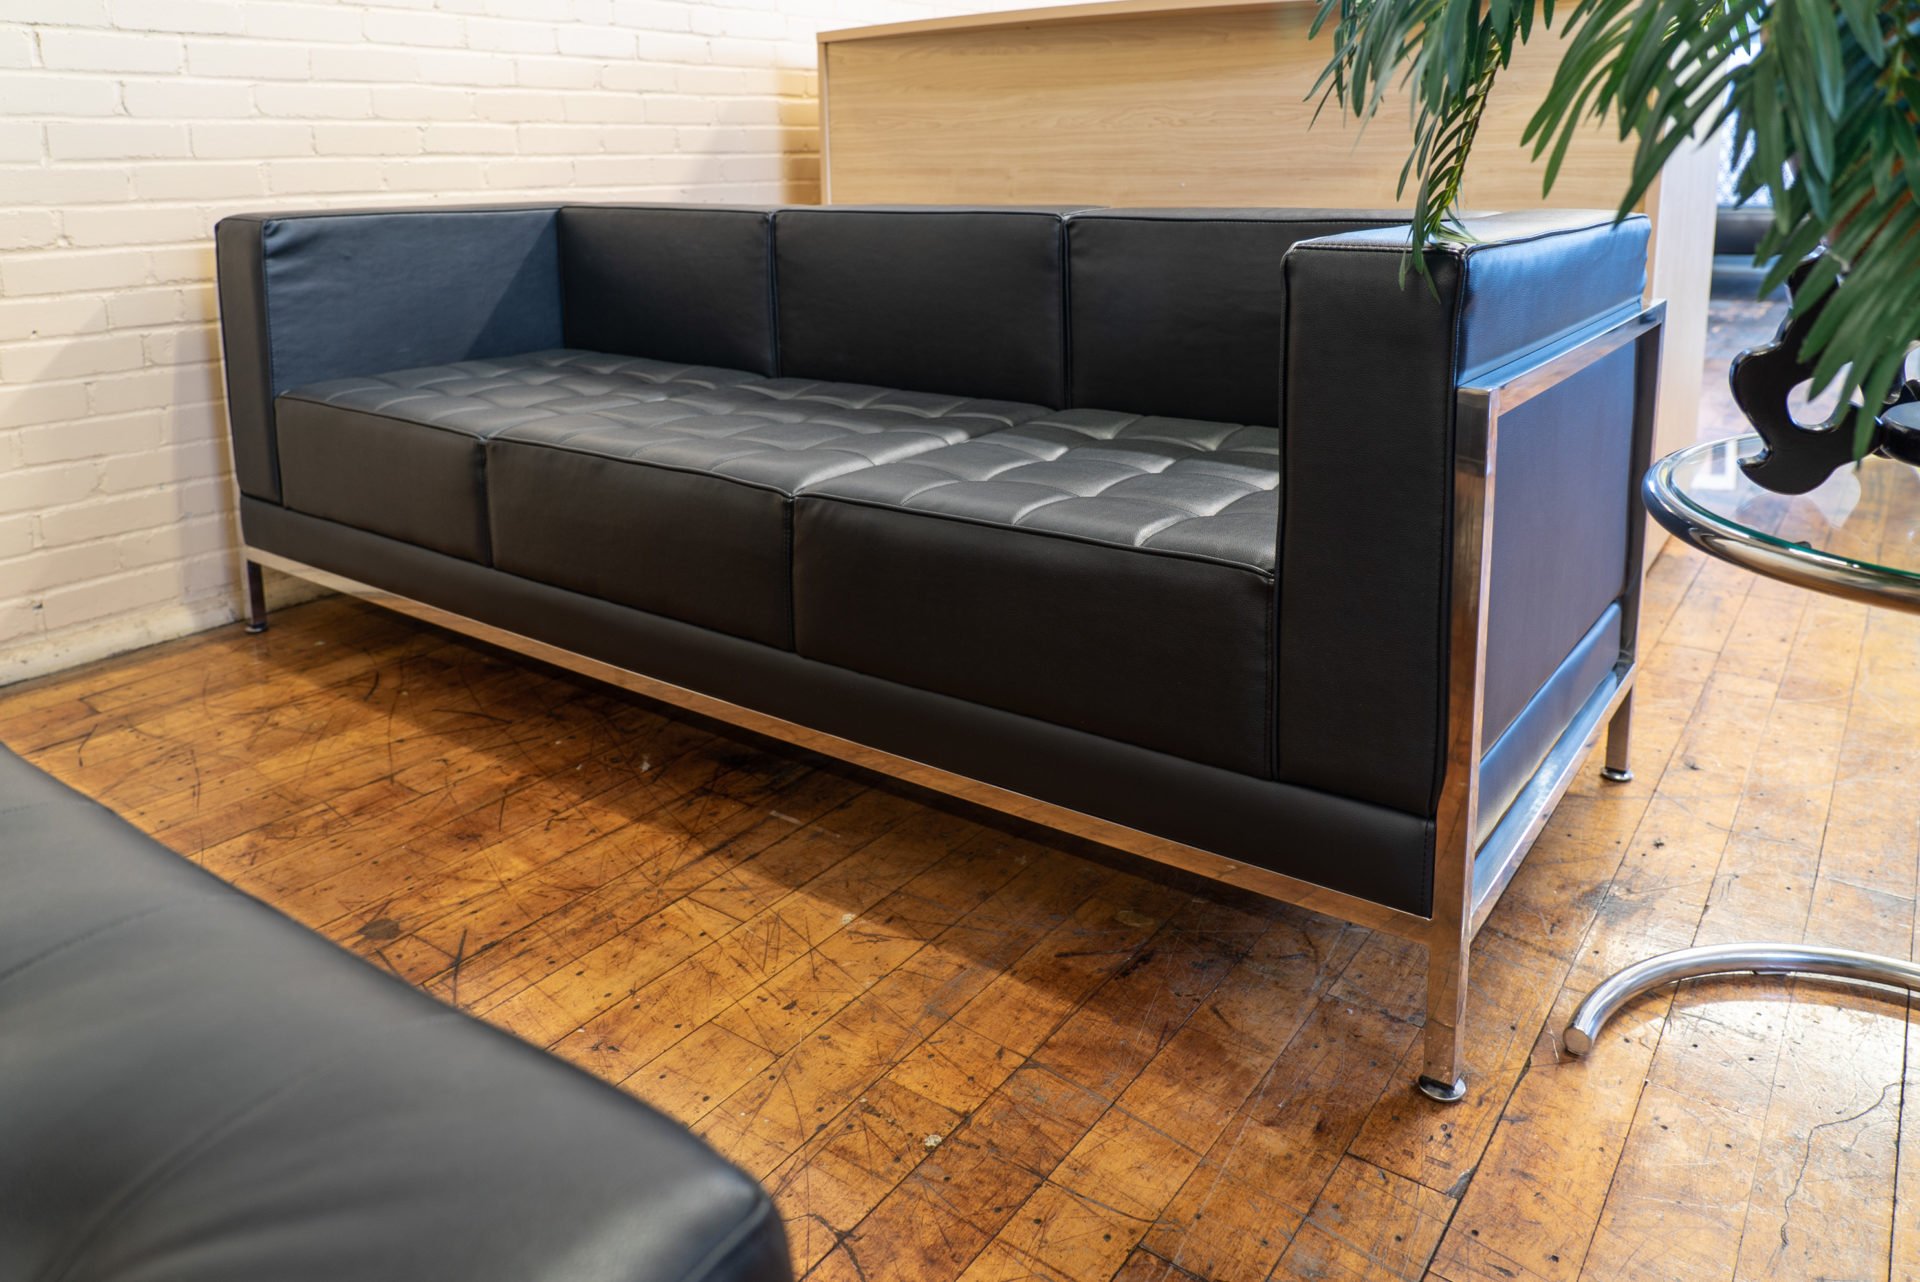 black leather sofa on clearnce